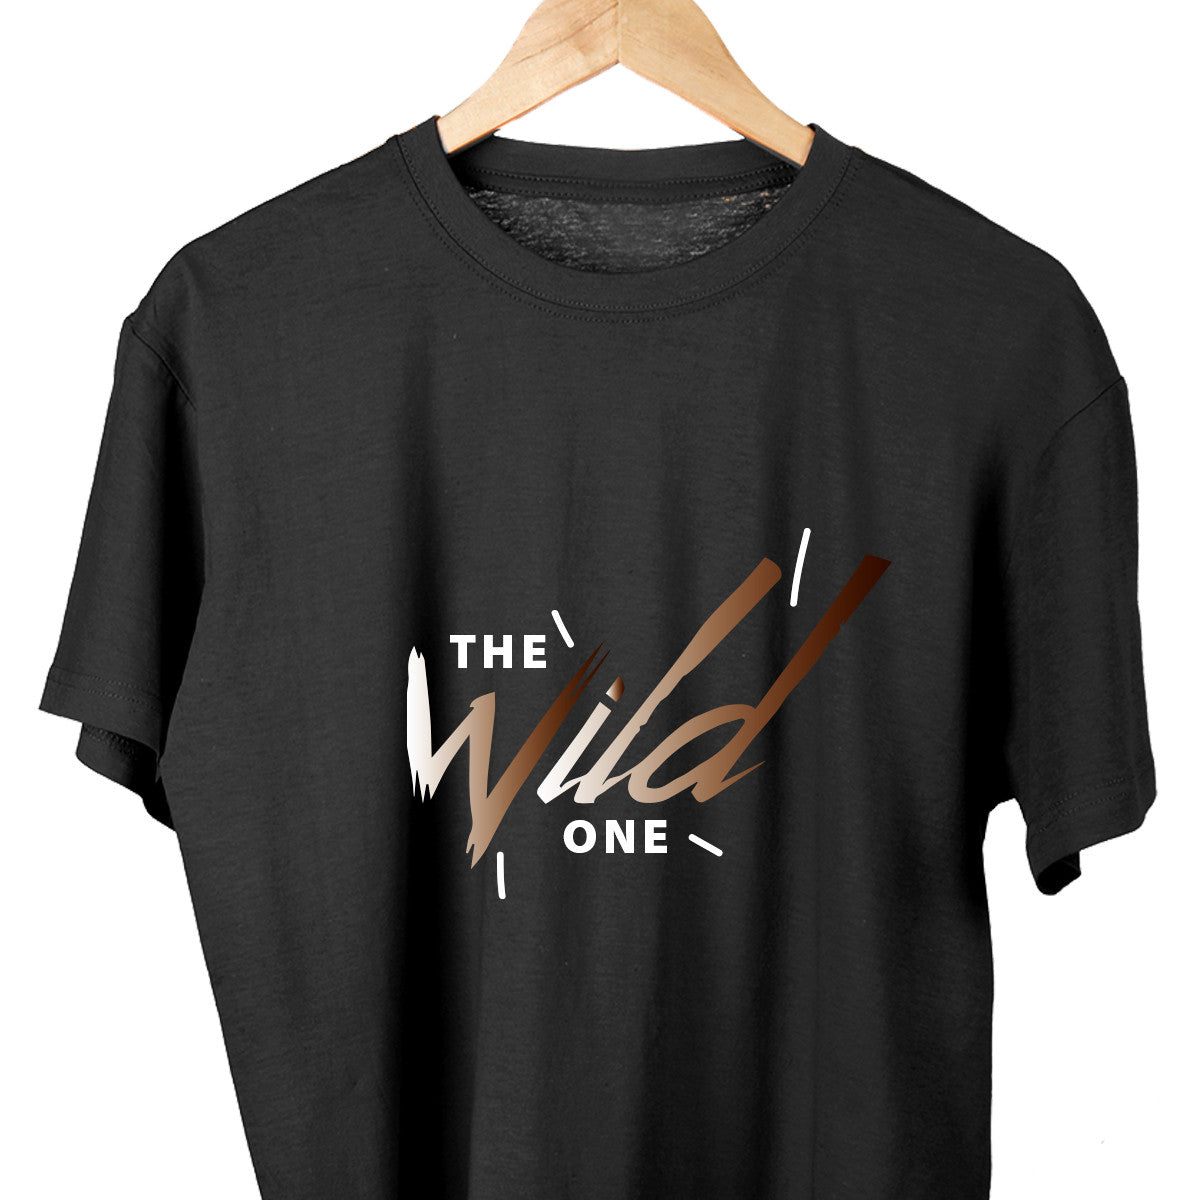 The Wild One T- Shirt